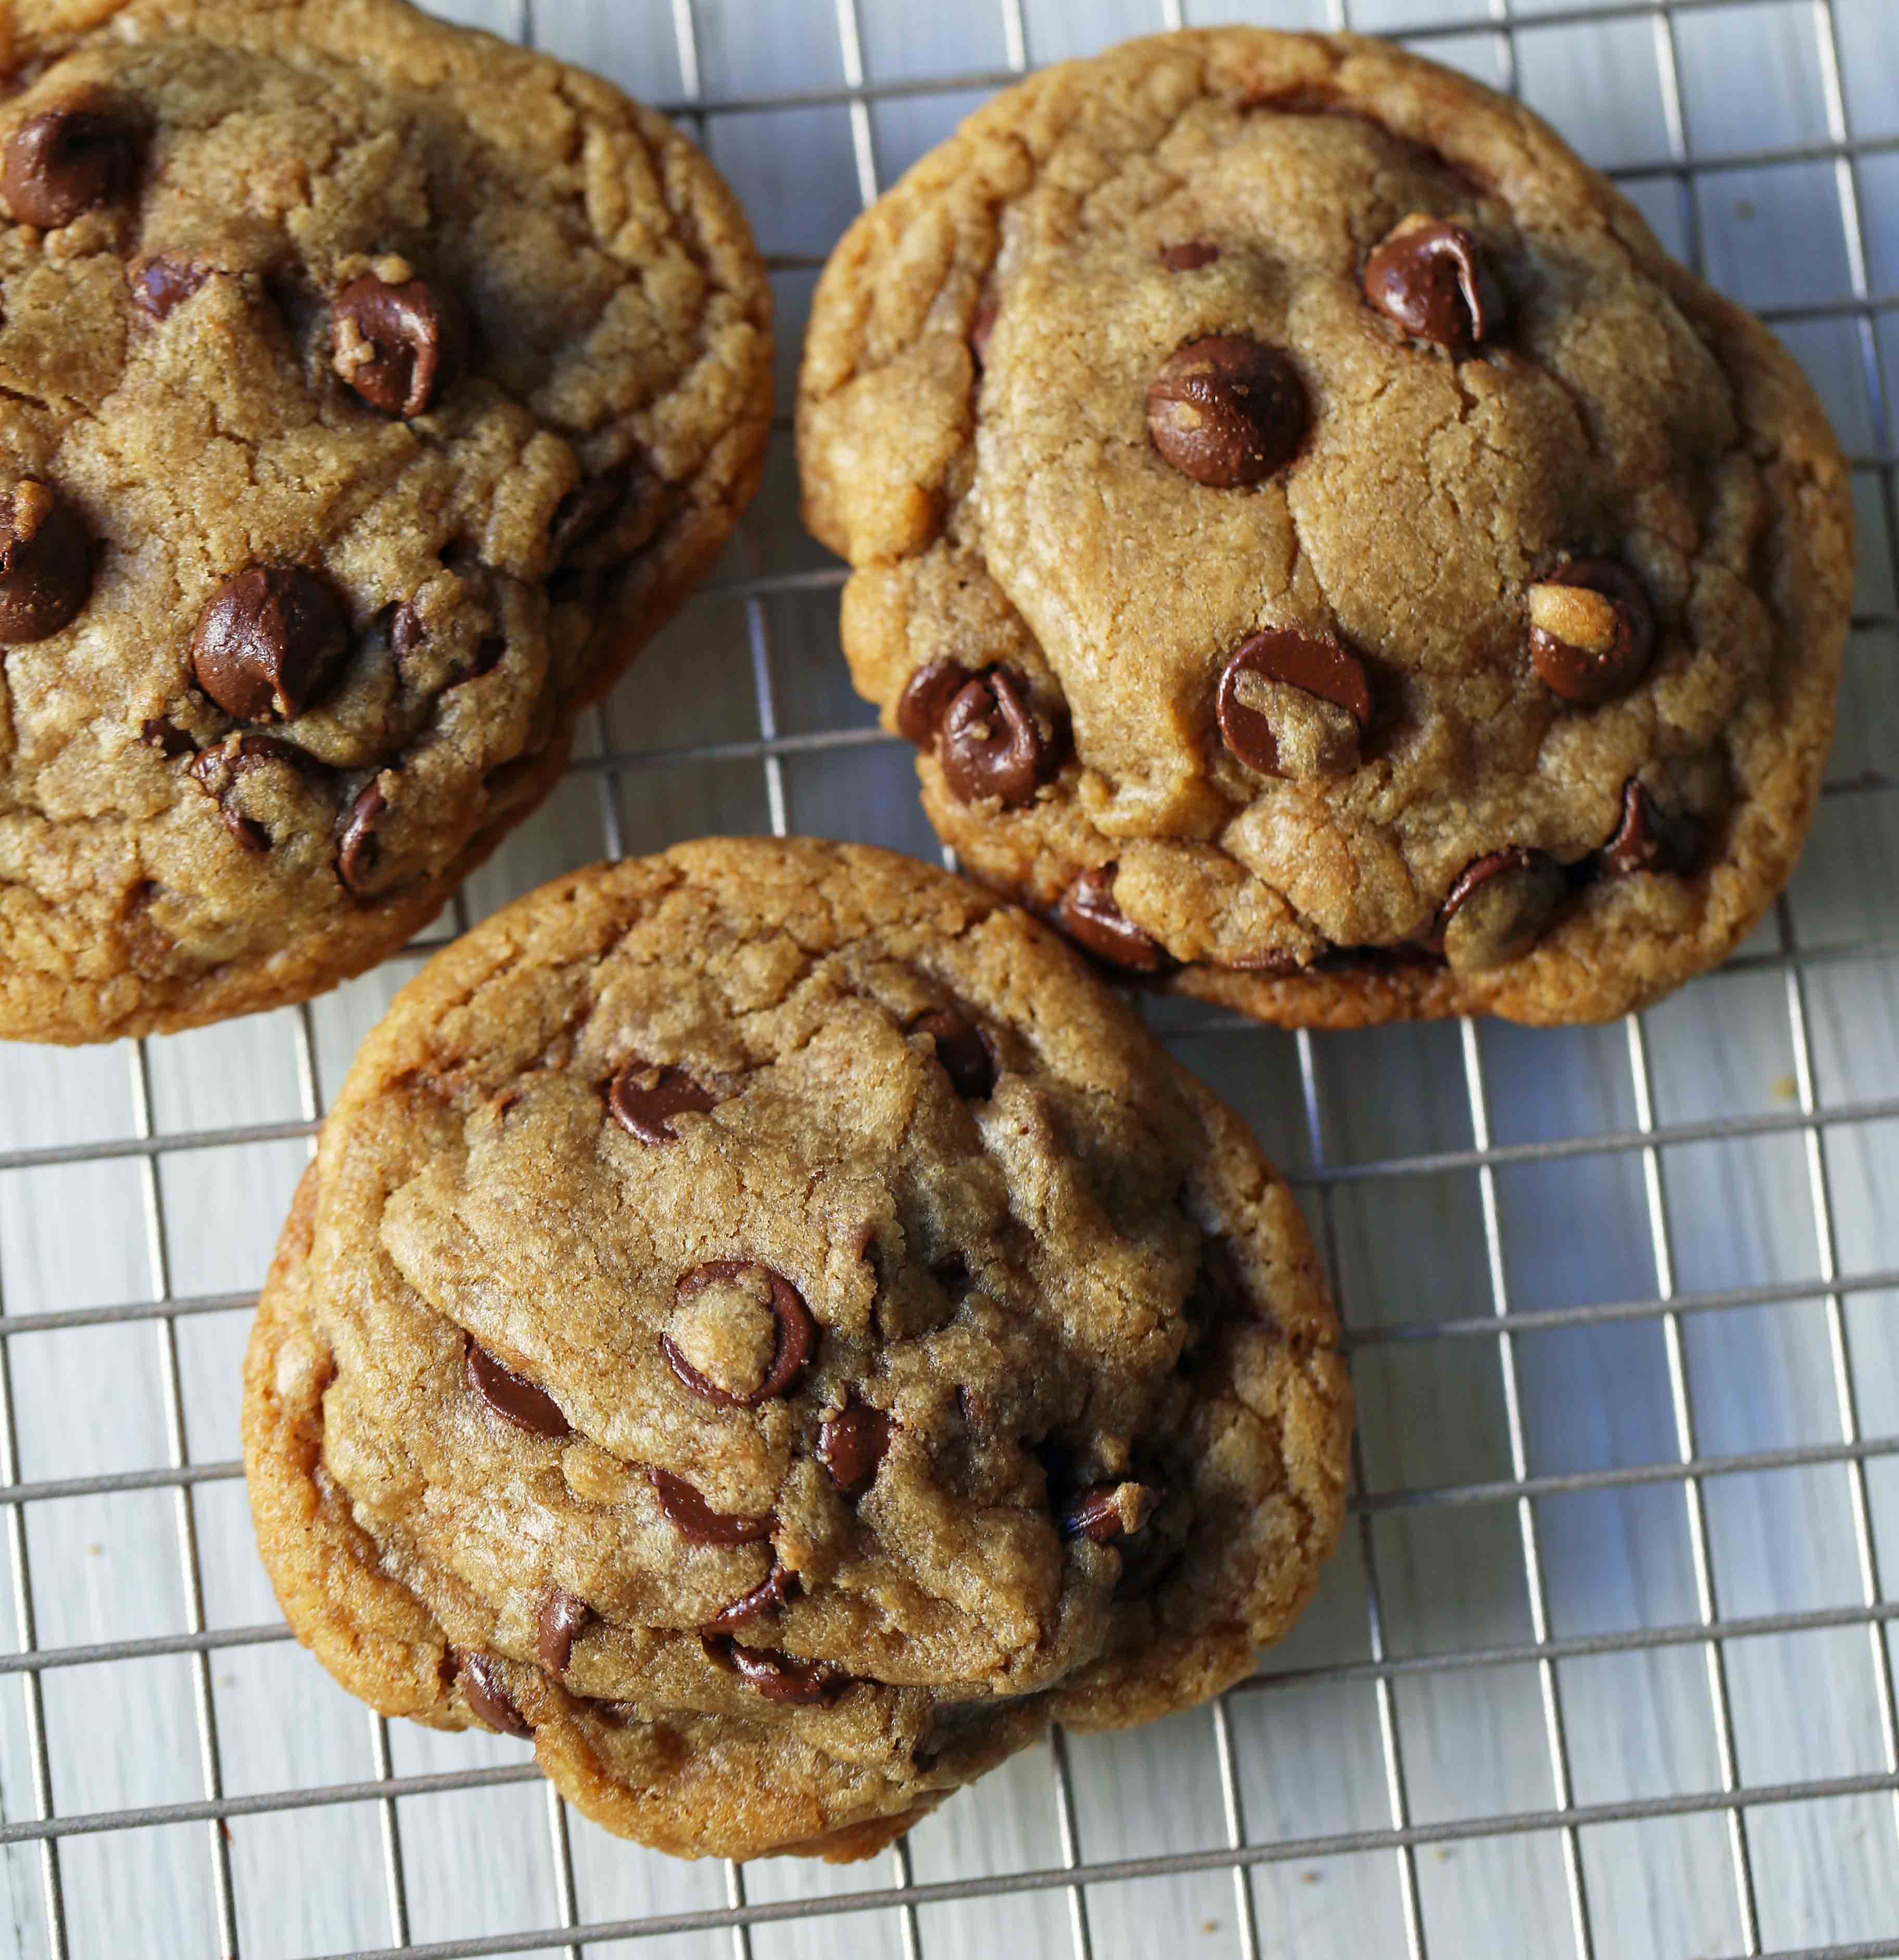 MJ's Top Secret Brown Butter Chocolate Chip Cookies. The best chocolate chip cookies made in a saucepan. Homemade browned butter chocolate chip cookie recipe. You will LOVE these cookies! www.modernhoney.com #brownbuttercookies #brownbutterchocolatechipcookies #chocolatechipcookies #cookies #chocolatechipcookie #cookierecipes